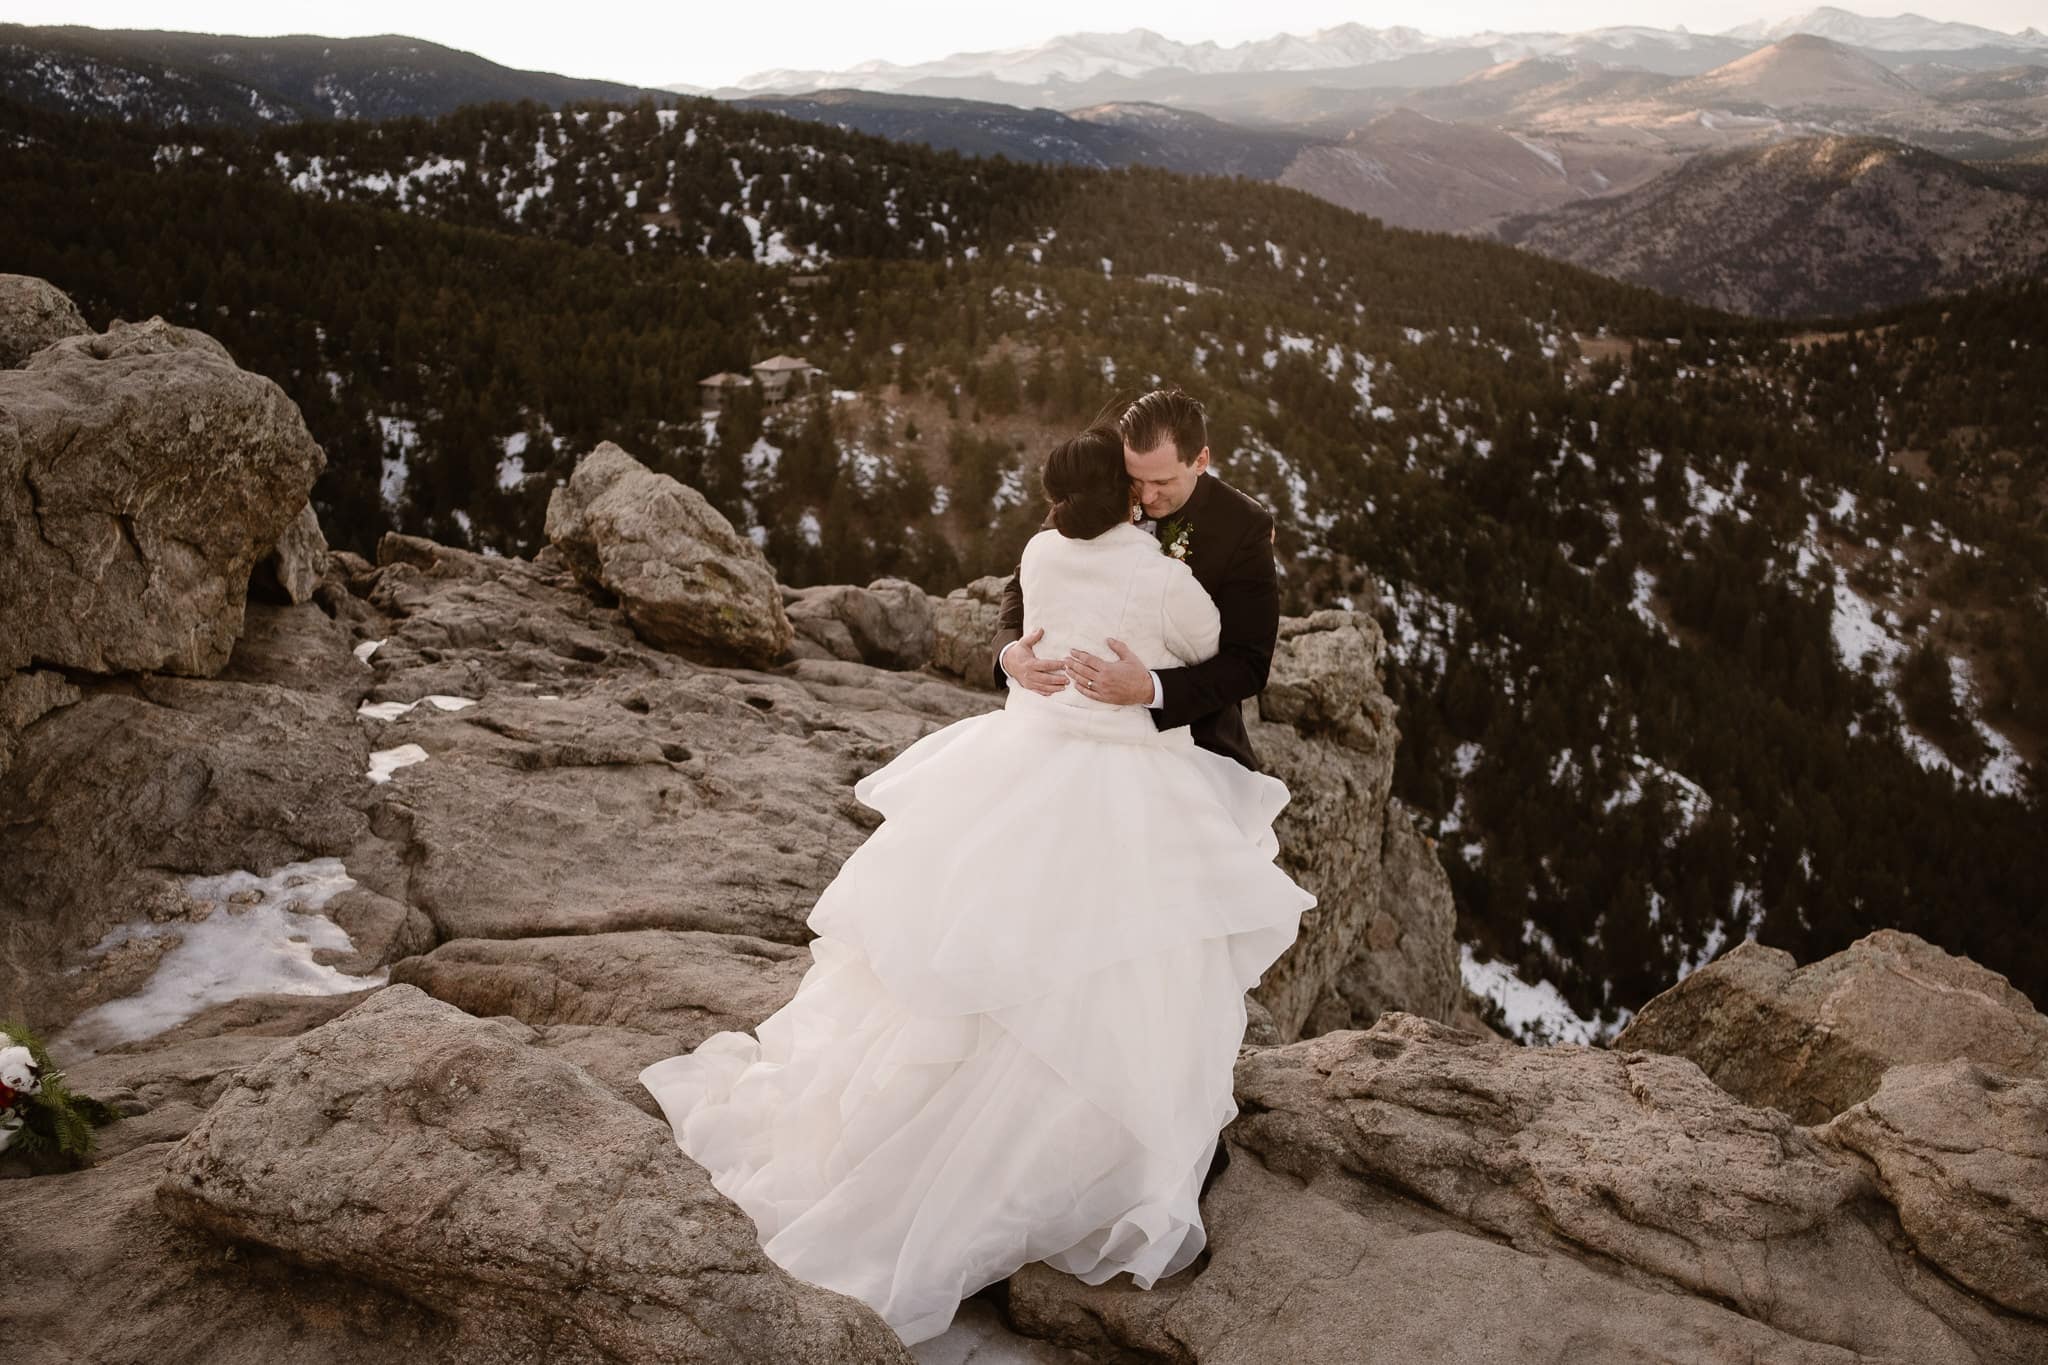 Lost Gulch wedding portraits of bride and groom, St Julien wedding with mountain portraits at sunset, Boulder wedding photographer, Colorado wedding photographer